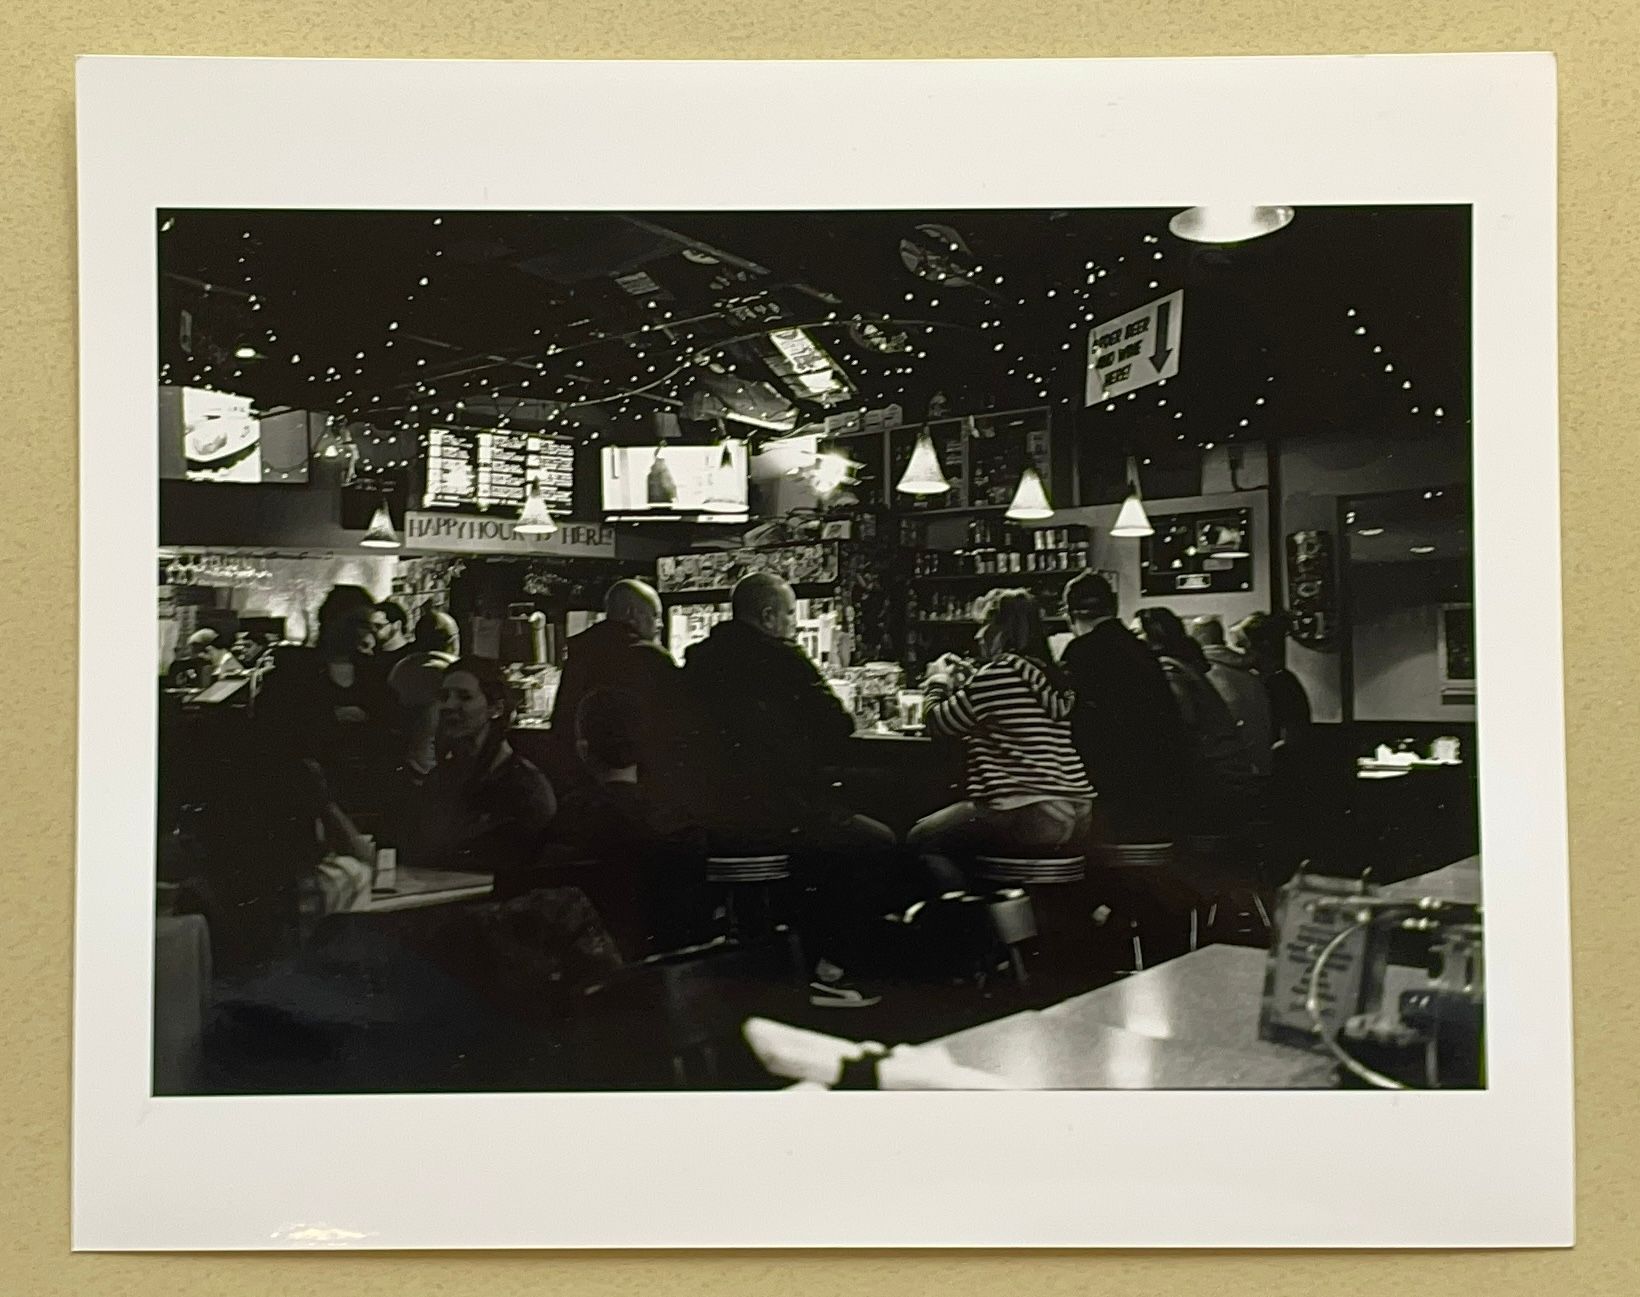 A glossy paper print of a black and white image of customers sitting around the bar and at tables at FireWorks Pizza in Leesburg, Virgina